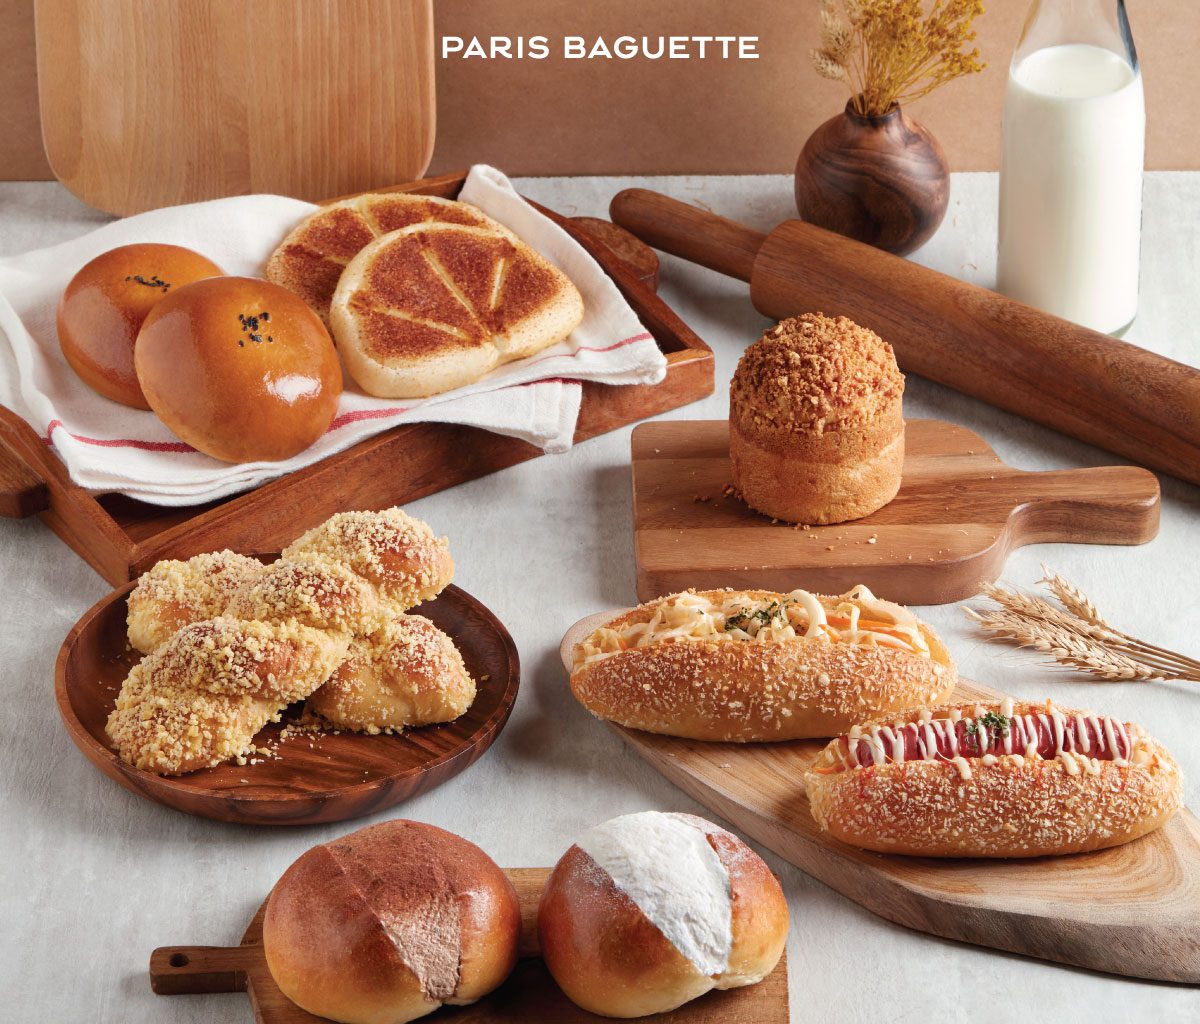 [PROMO] Paris Baguette Adds 6 New Variety Of Soft Breads to their Existing Range, Baked Fresh Daily - Alvinology